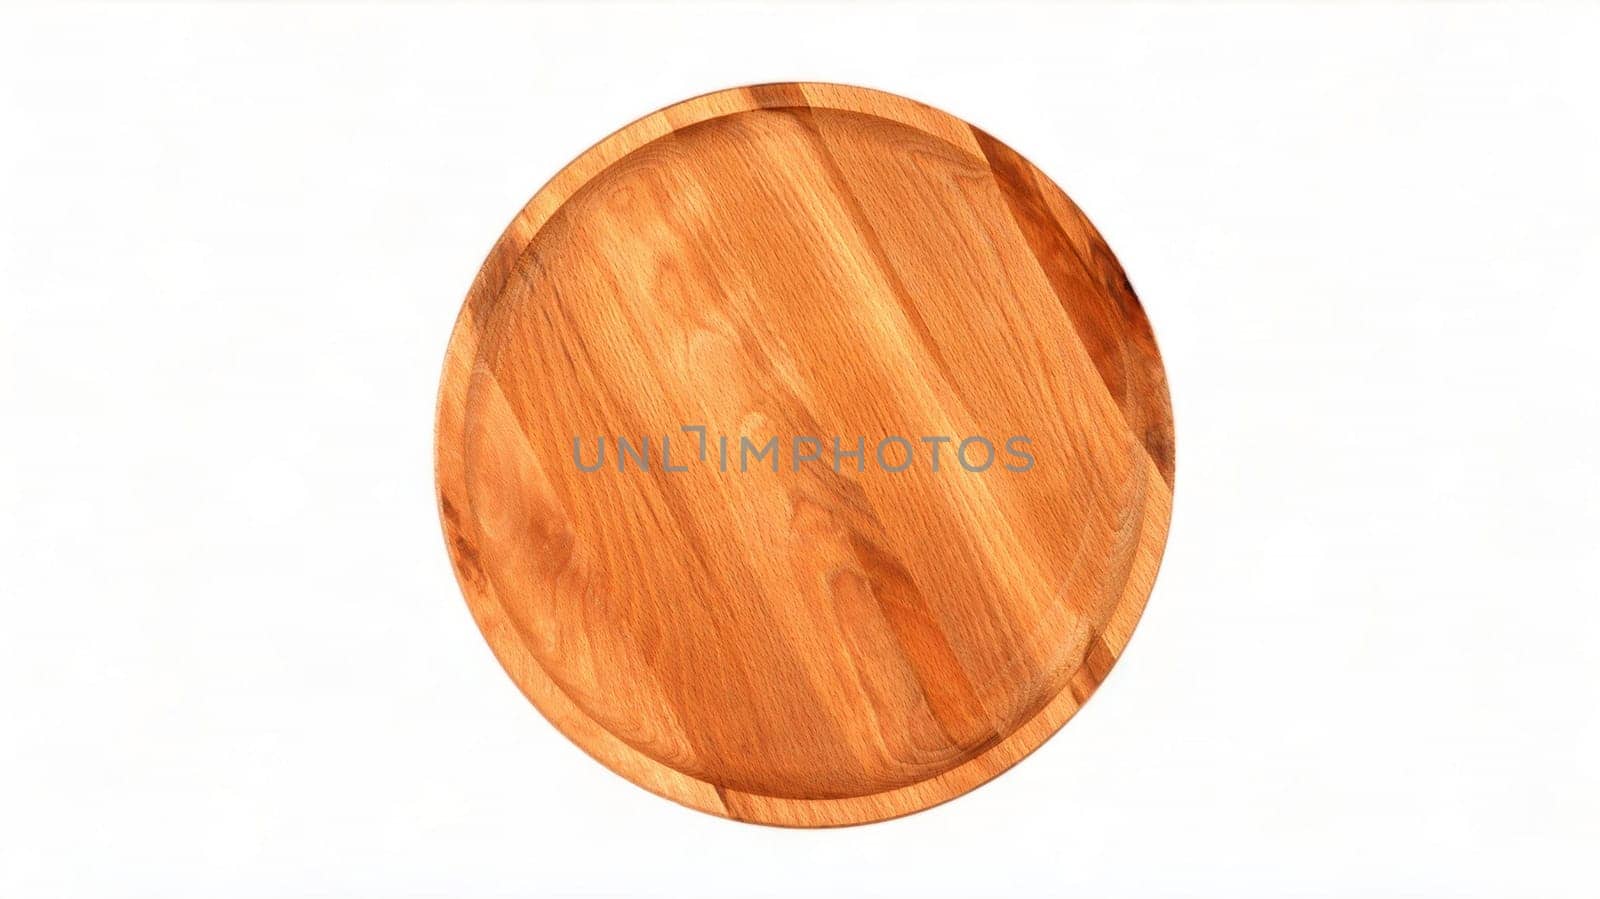 Top view and perspective of empty round wooden plate on white background. Space for branding, text or menu. Business food brand template. Layout. Cooking food. Culinary background. Flat layout